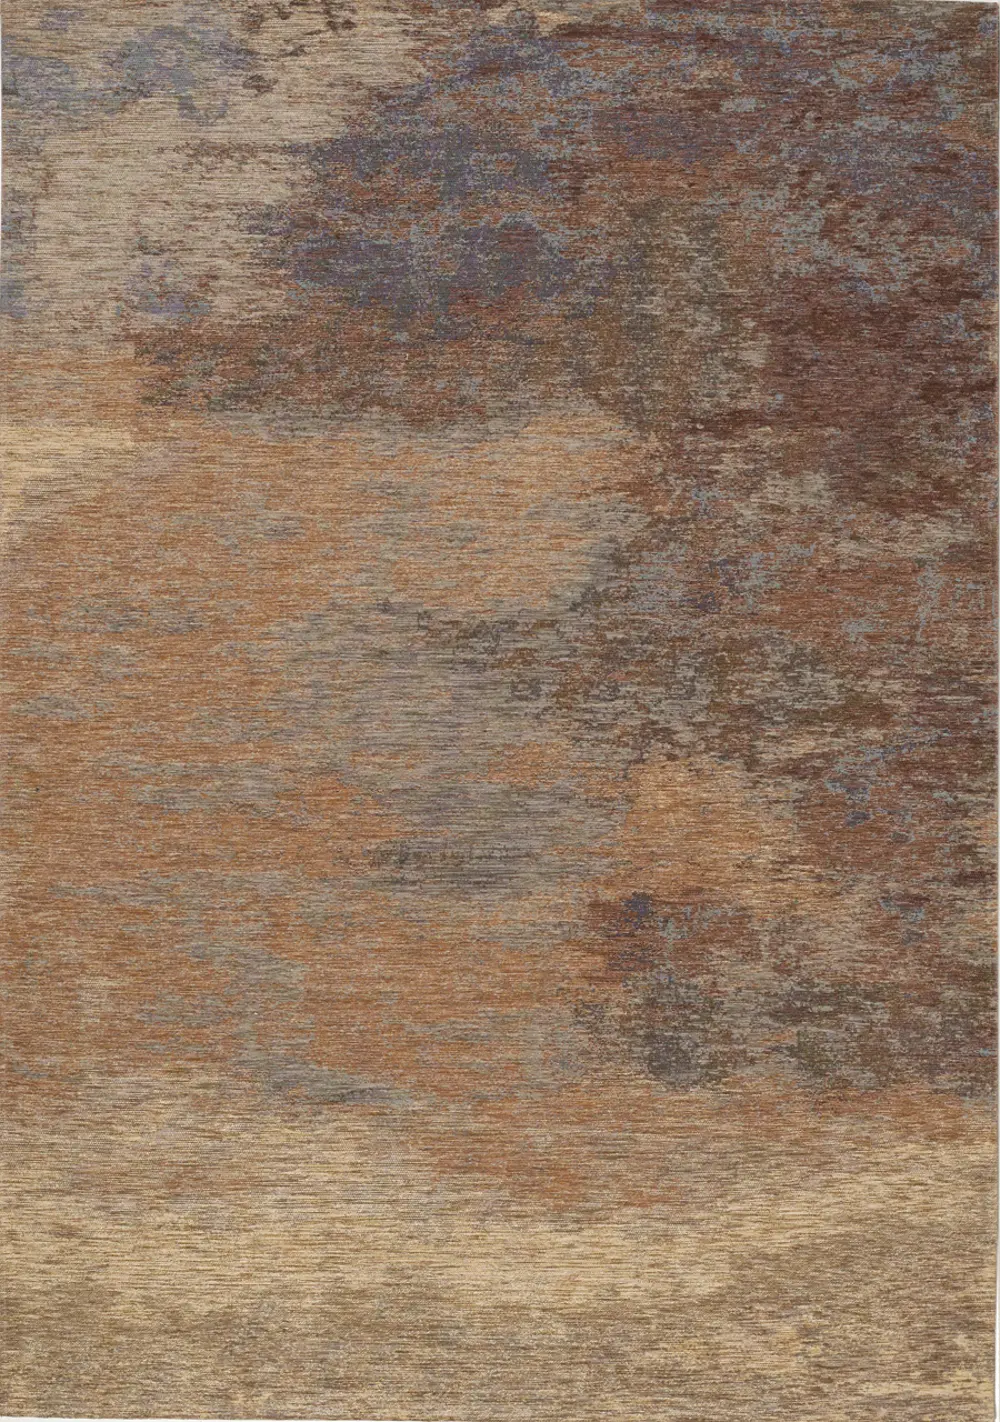 5 x 8 Medium Distressed Beige and Red Area Rug - Cathedral-1